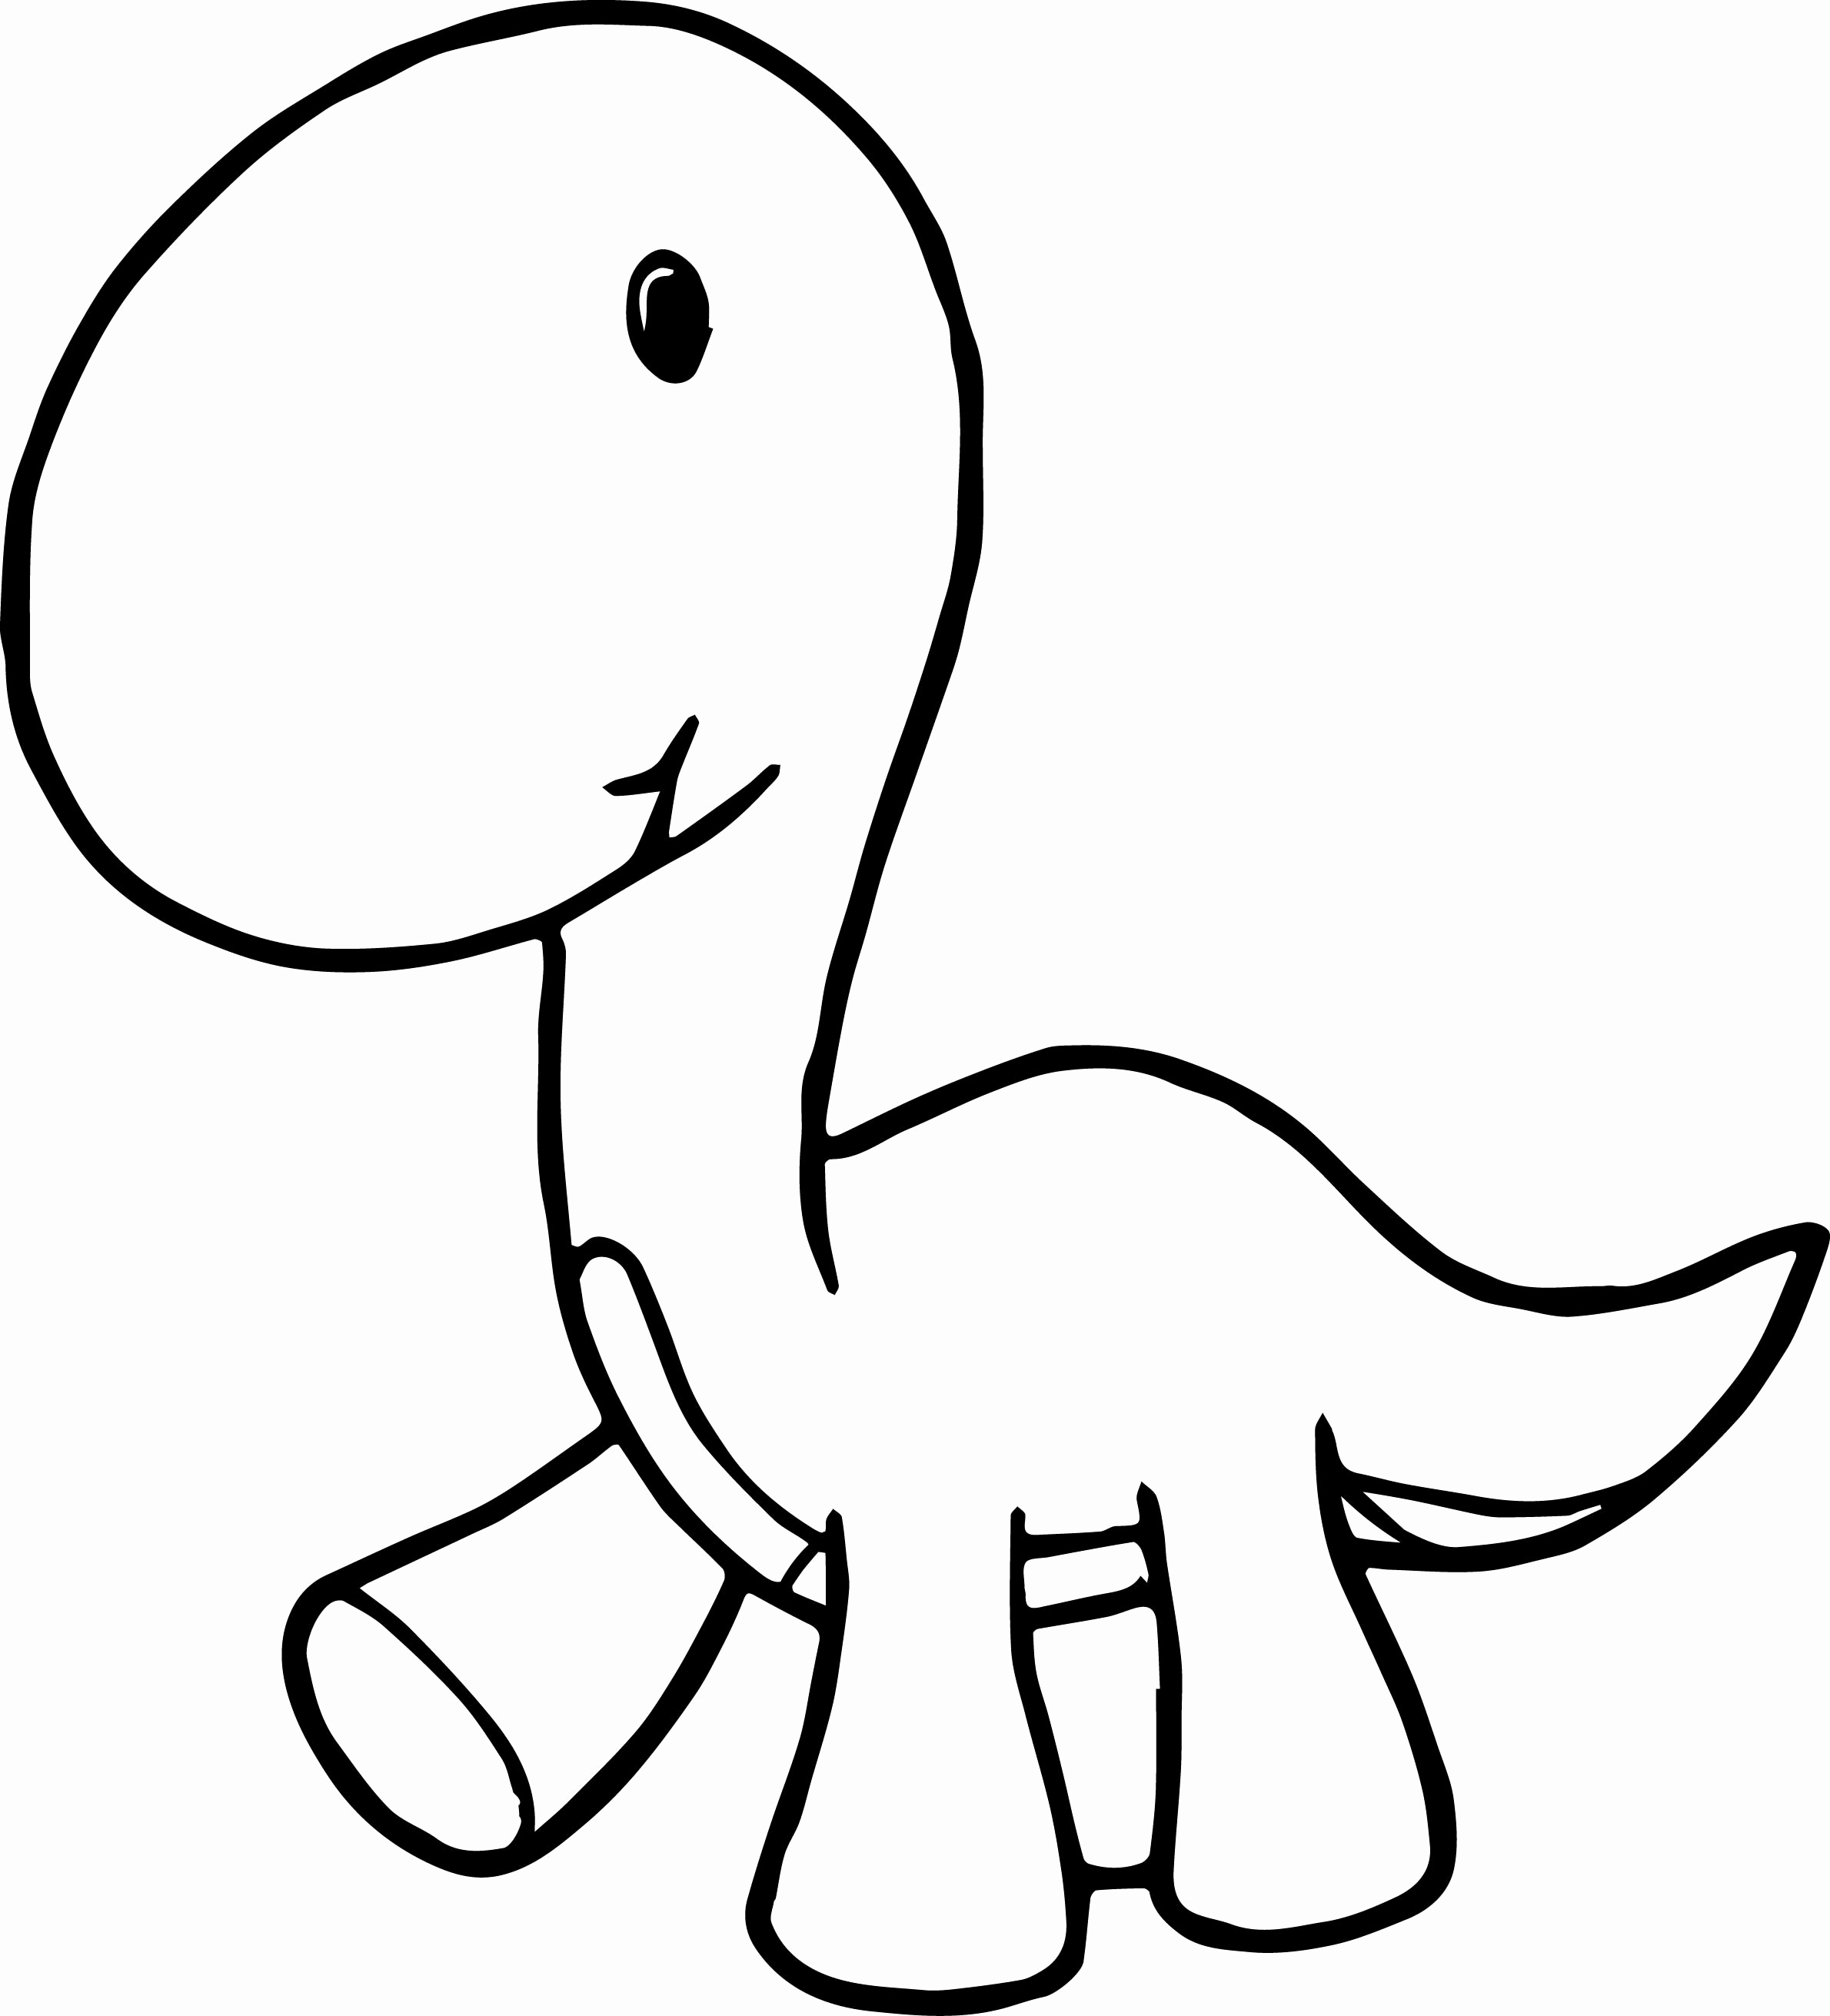 Cute Dinosaur Coloring Pages at GetColorings com Free printable